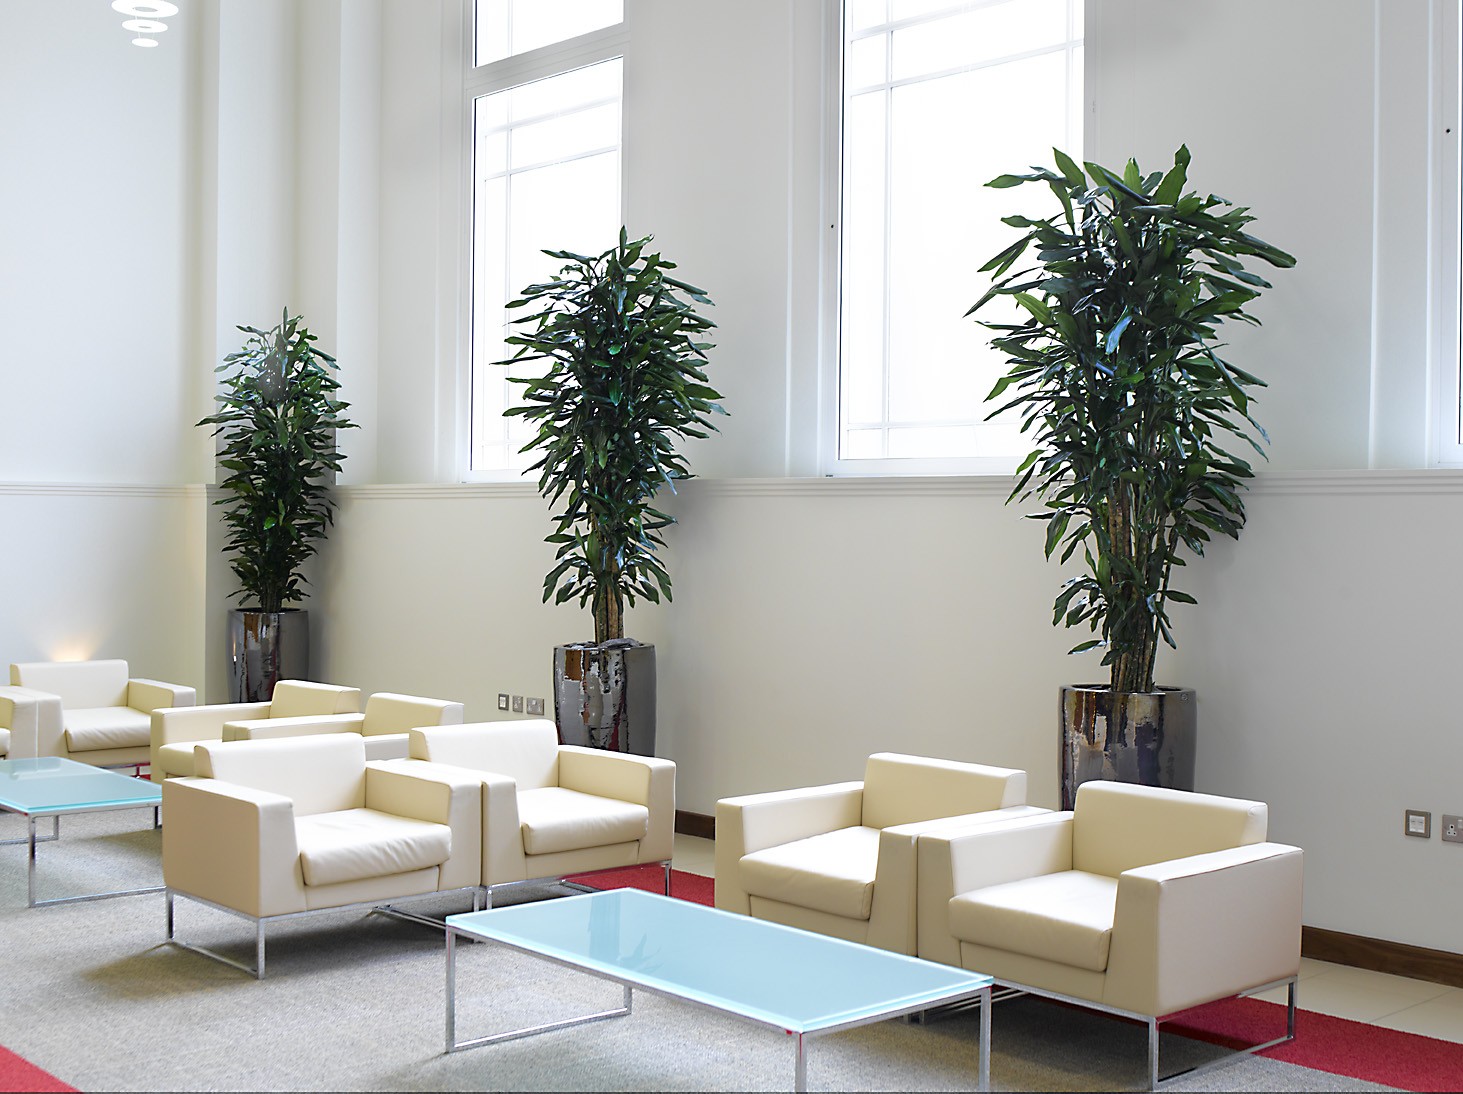 Great Plants for the office – Dracaena